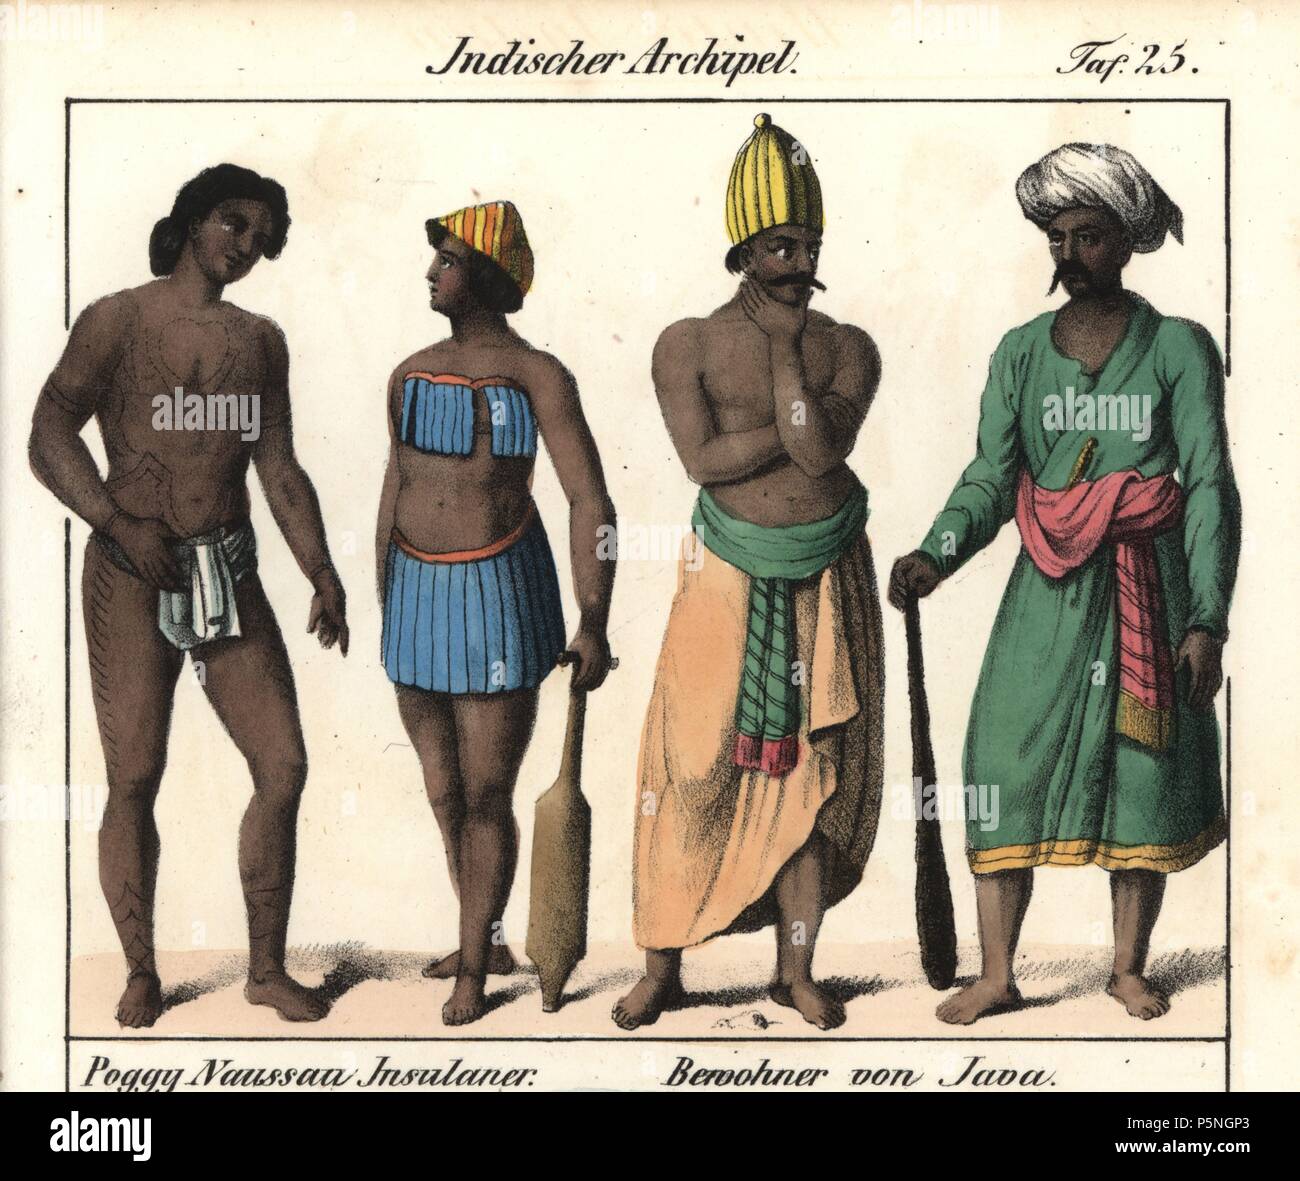 Islanders with tattoos from the islands of Poggy and Naussau, off Sumatra, and natives of Java, Indonesia. Handcoloured lithograph from Friedrich Wilhelm Goedsche's "Vollstaendige Völkergallerie in getreuen Abbildungen" (Complete Gallery of Peoples in True Pictures), Meissen, circa 1835-1840. Goedsche (1785-1863) was a German writer, bookseller and publisher in Meissen. Many of the illustrations were adapted from Bertuch's "Bilderbuch fur Kinder" and others. Stock Photo